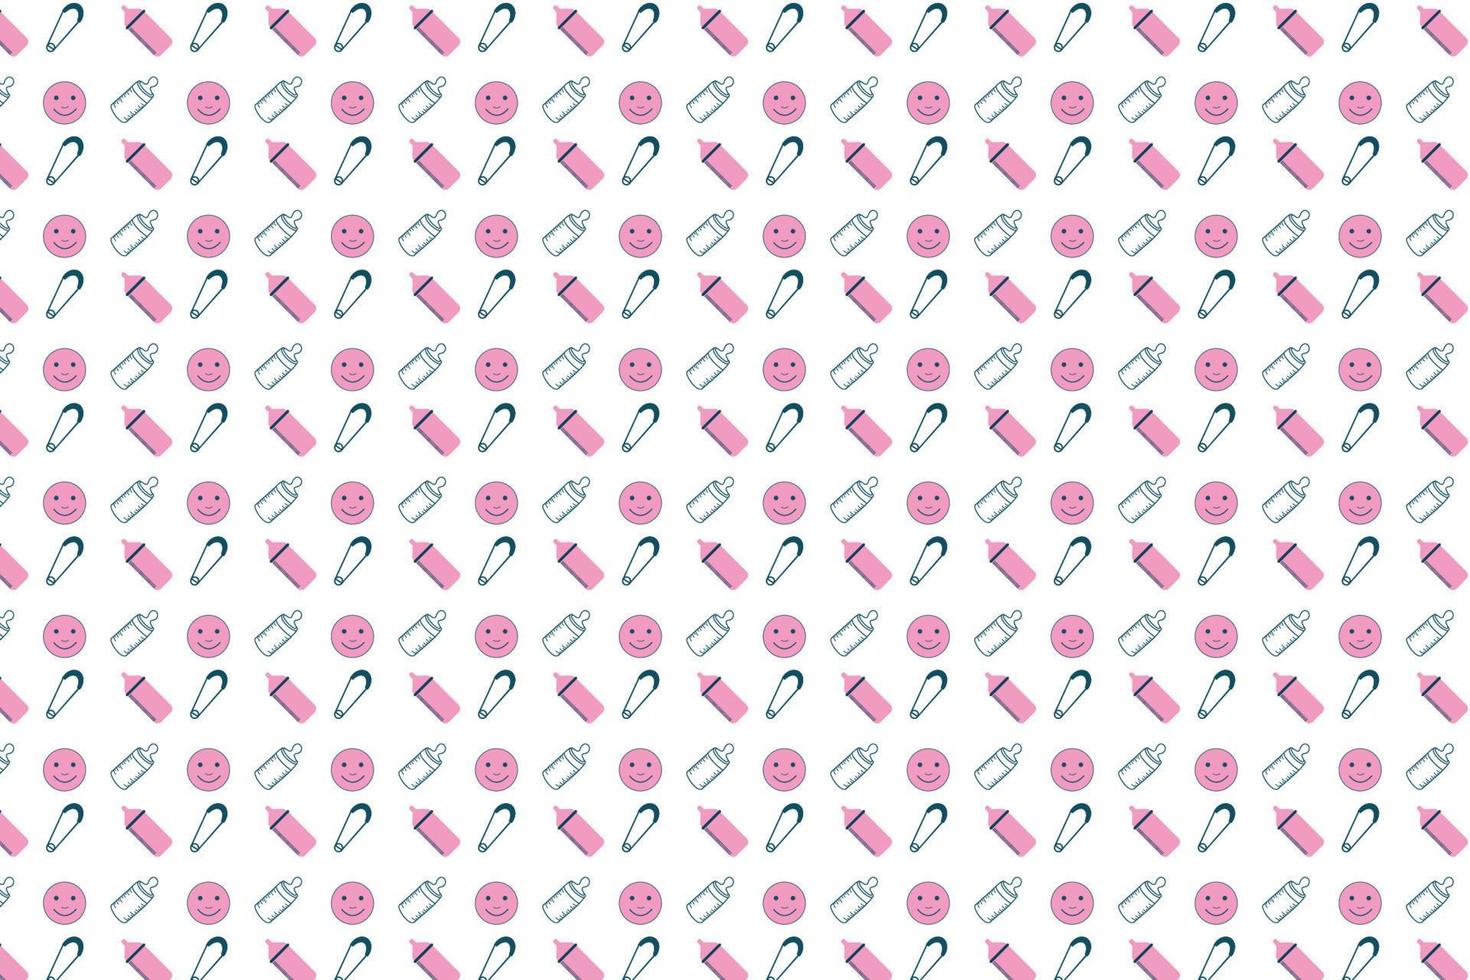 Endless baby pattern background design for backdrops, wallpapers, and book covers. Seamless childish pattern decoration with smiling faces and baby feeder icons. Abstract kid's pattern vector. vector